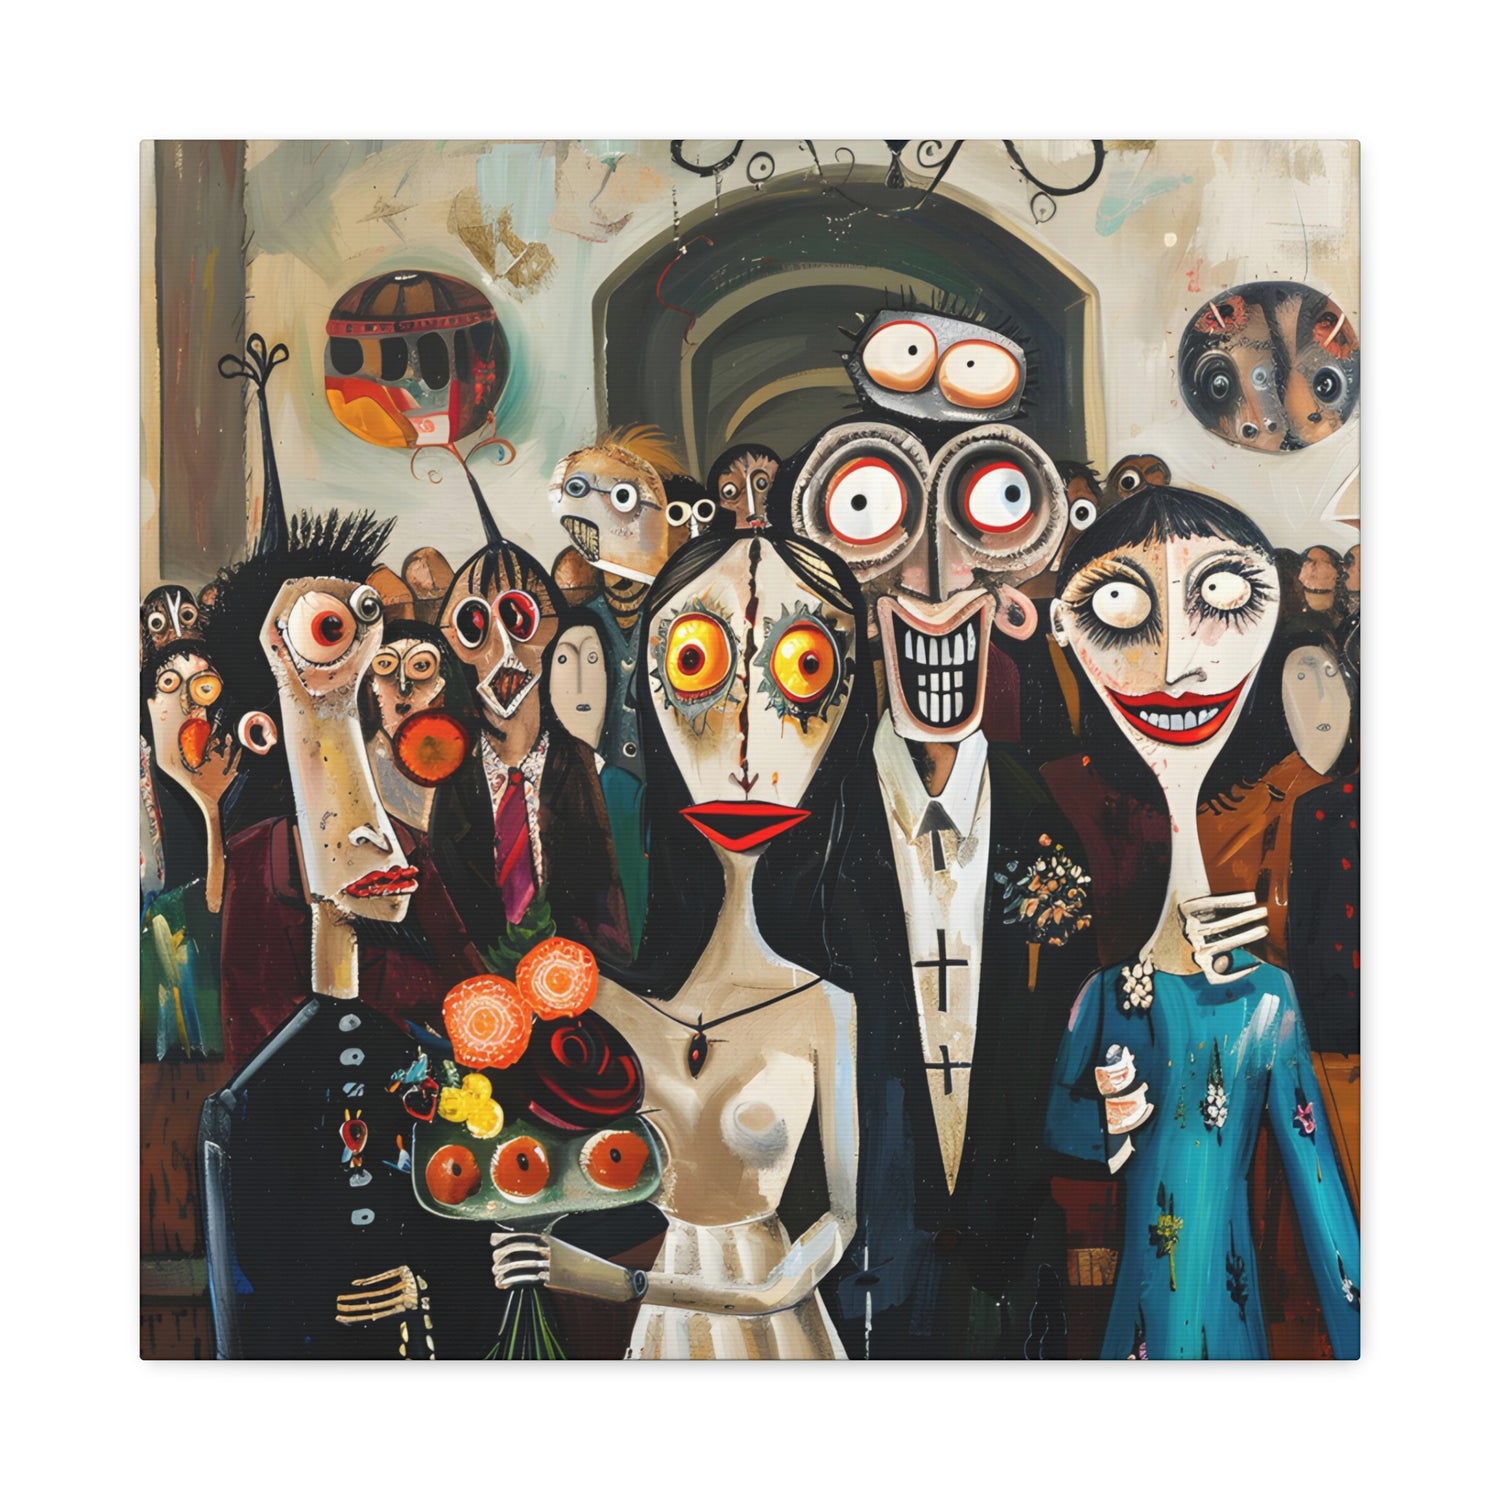 David Miller. The Eclectic Union, Exclusive Canvas Print